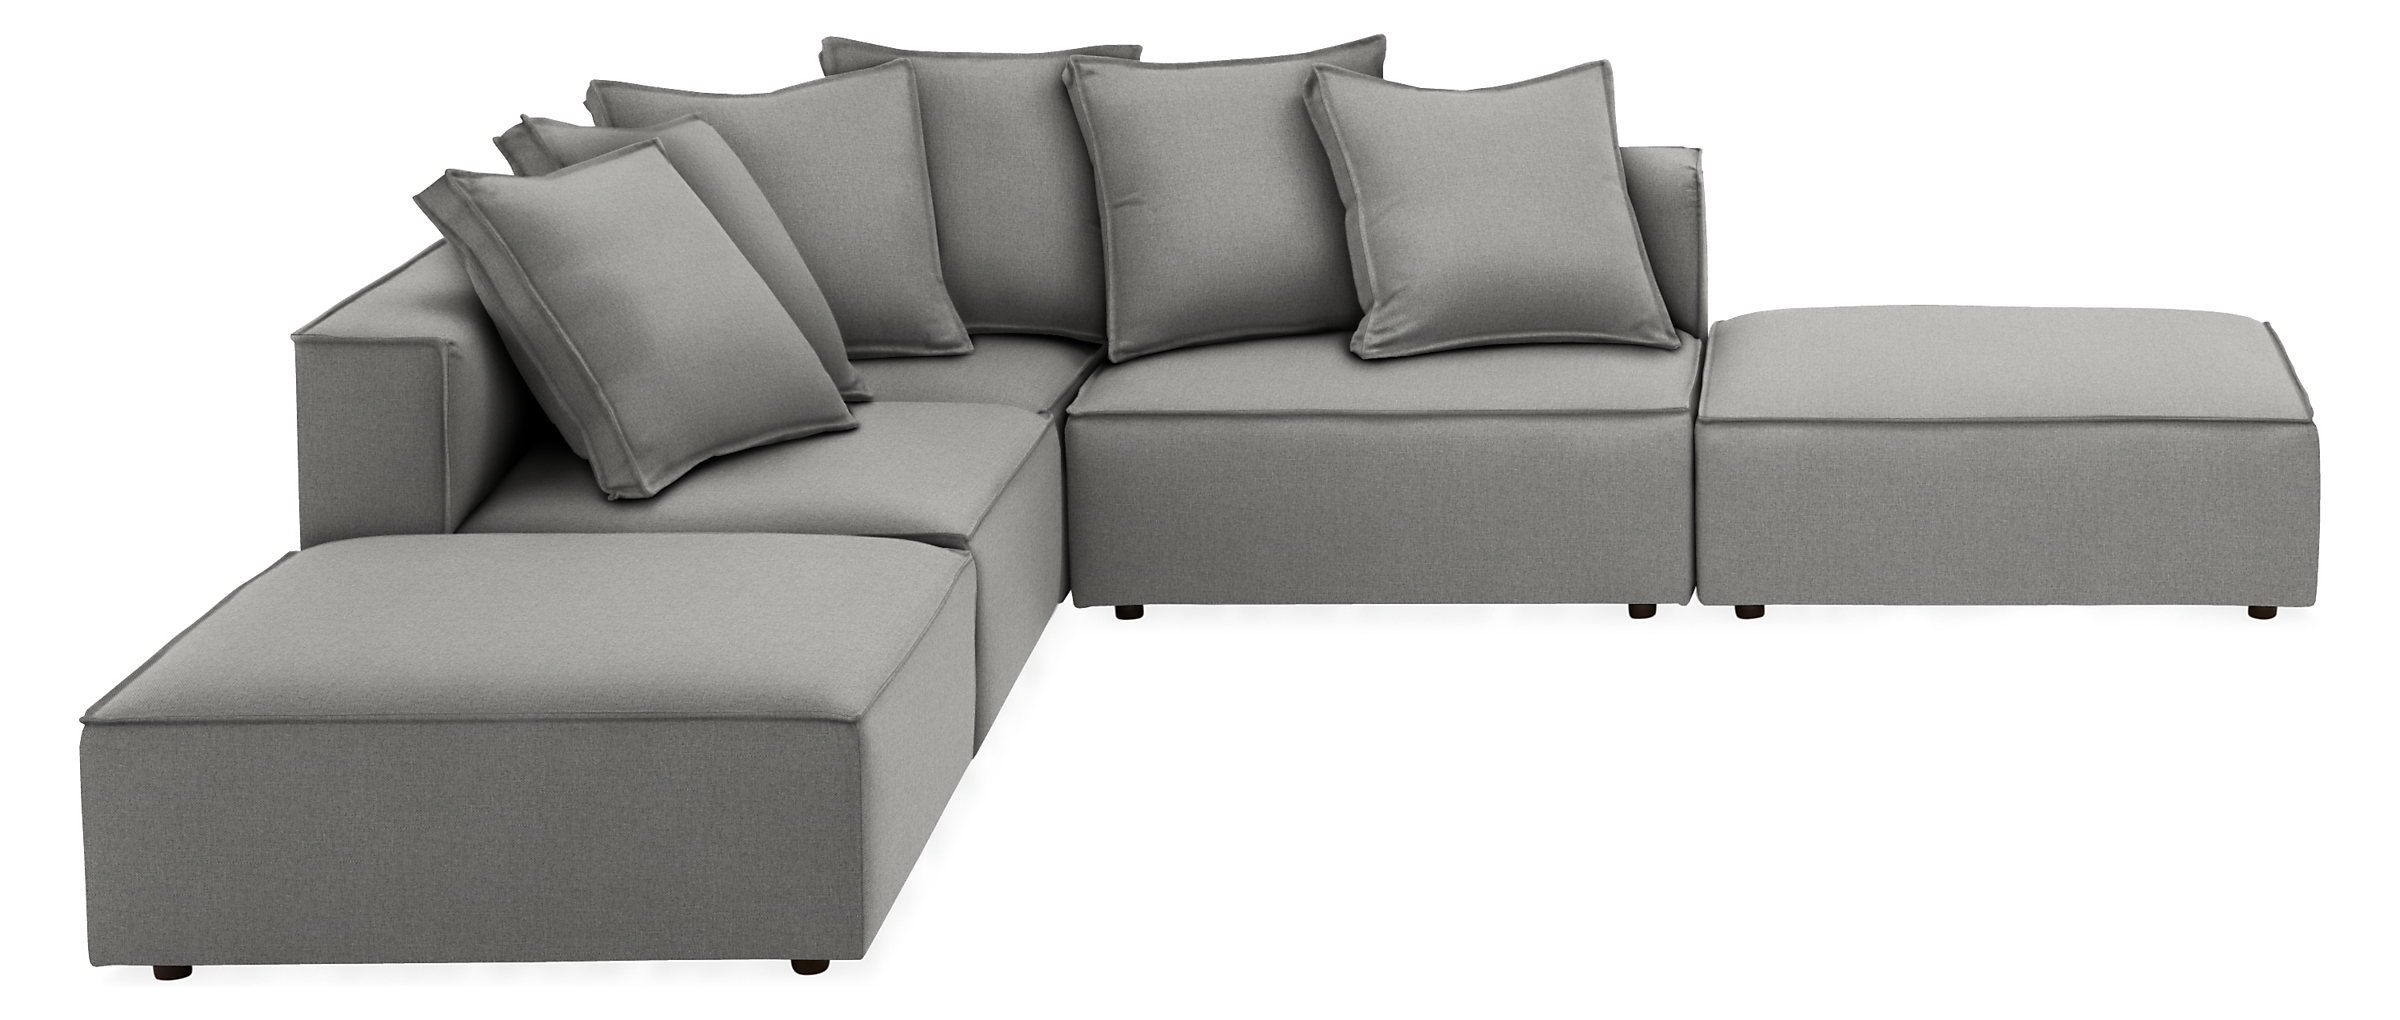 Oasis 118x118" Five-Piece Modular Sectional with Otto